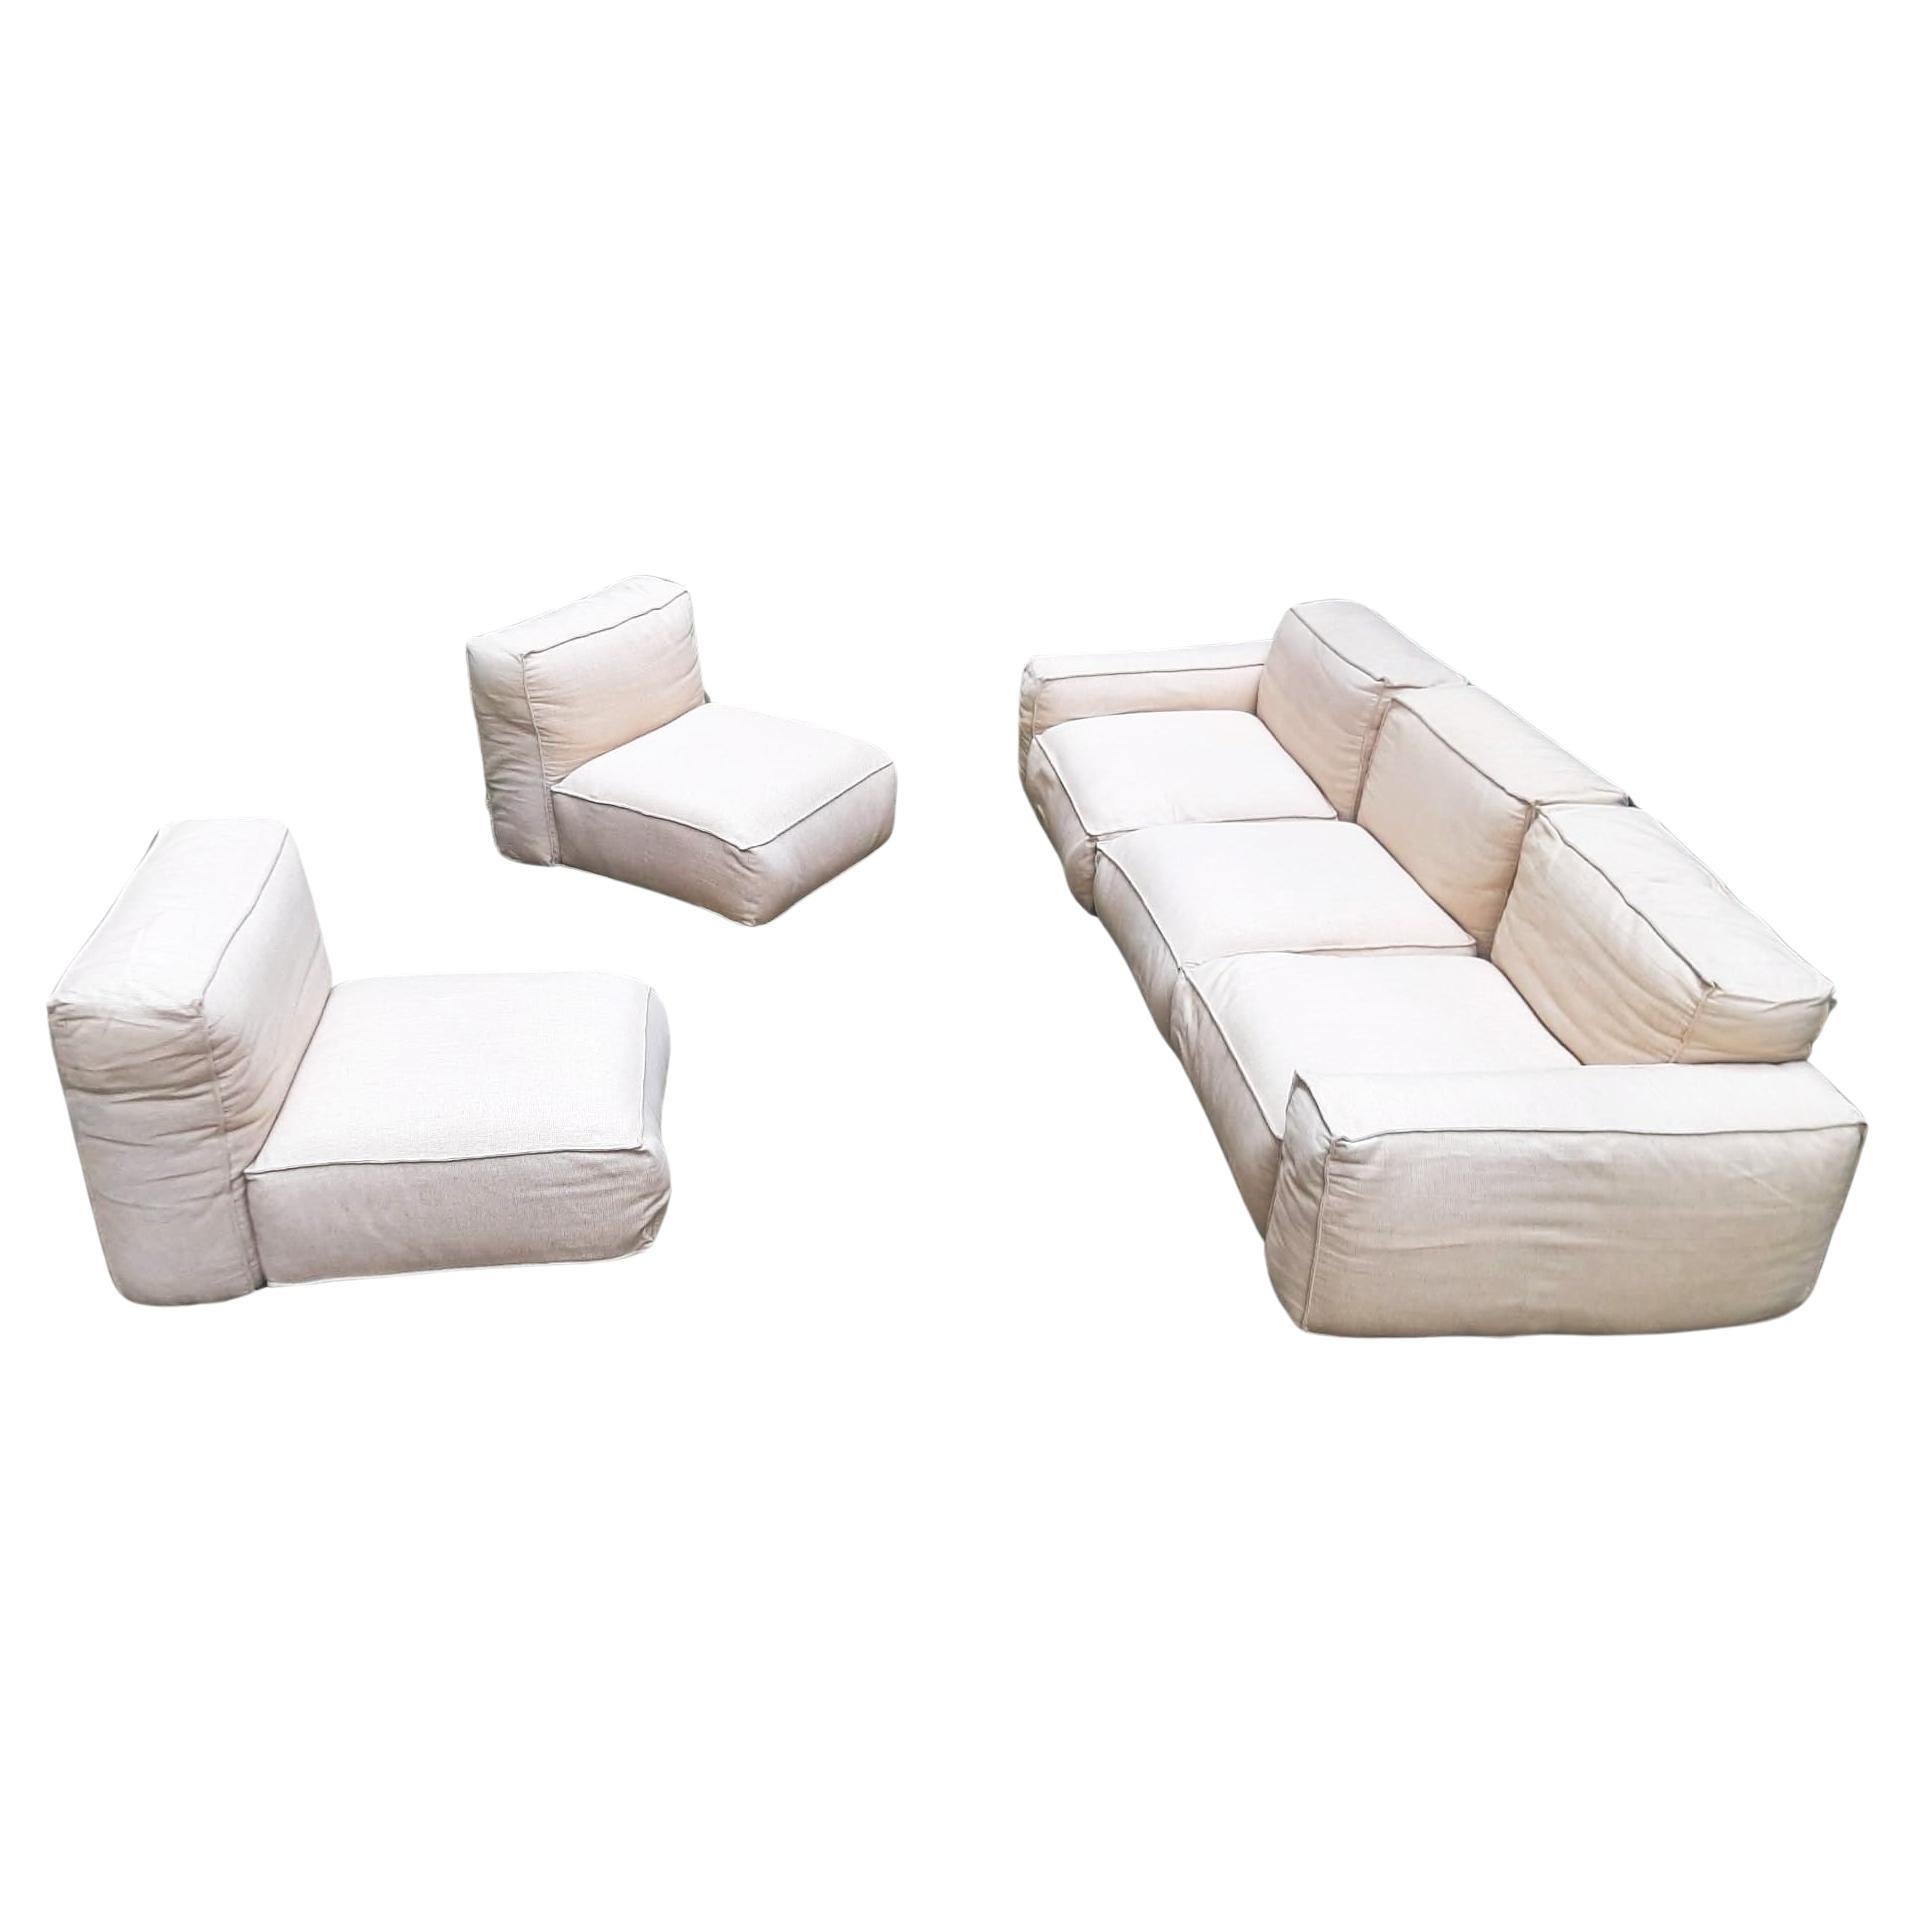 Modular set of 5 Marechiara chairs by Mario Marenco for Arflex For Sale